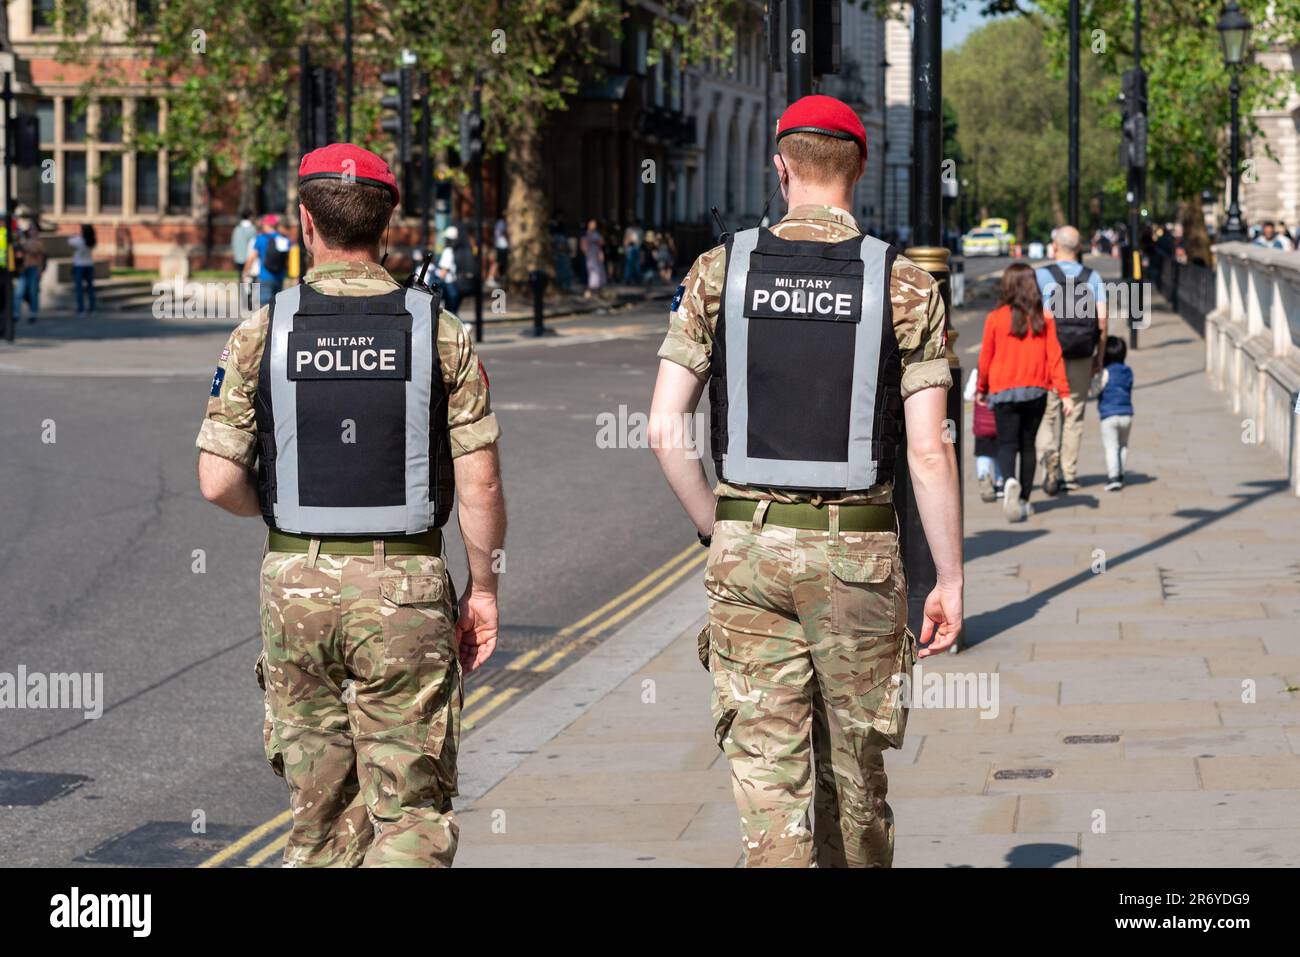 Military Police patrol at Colonel's review of Trooping the Colour, final evaluation of the military parade before the full event takes place next week Stock Photo